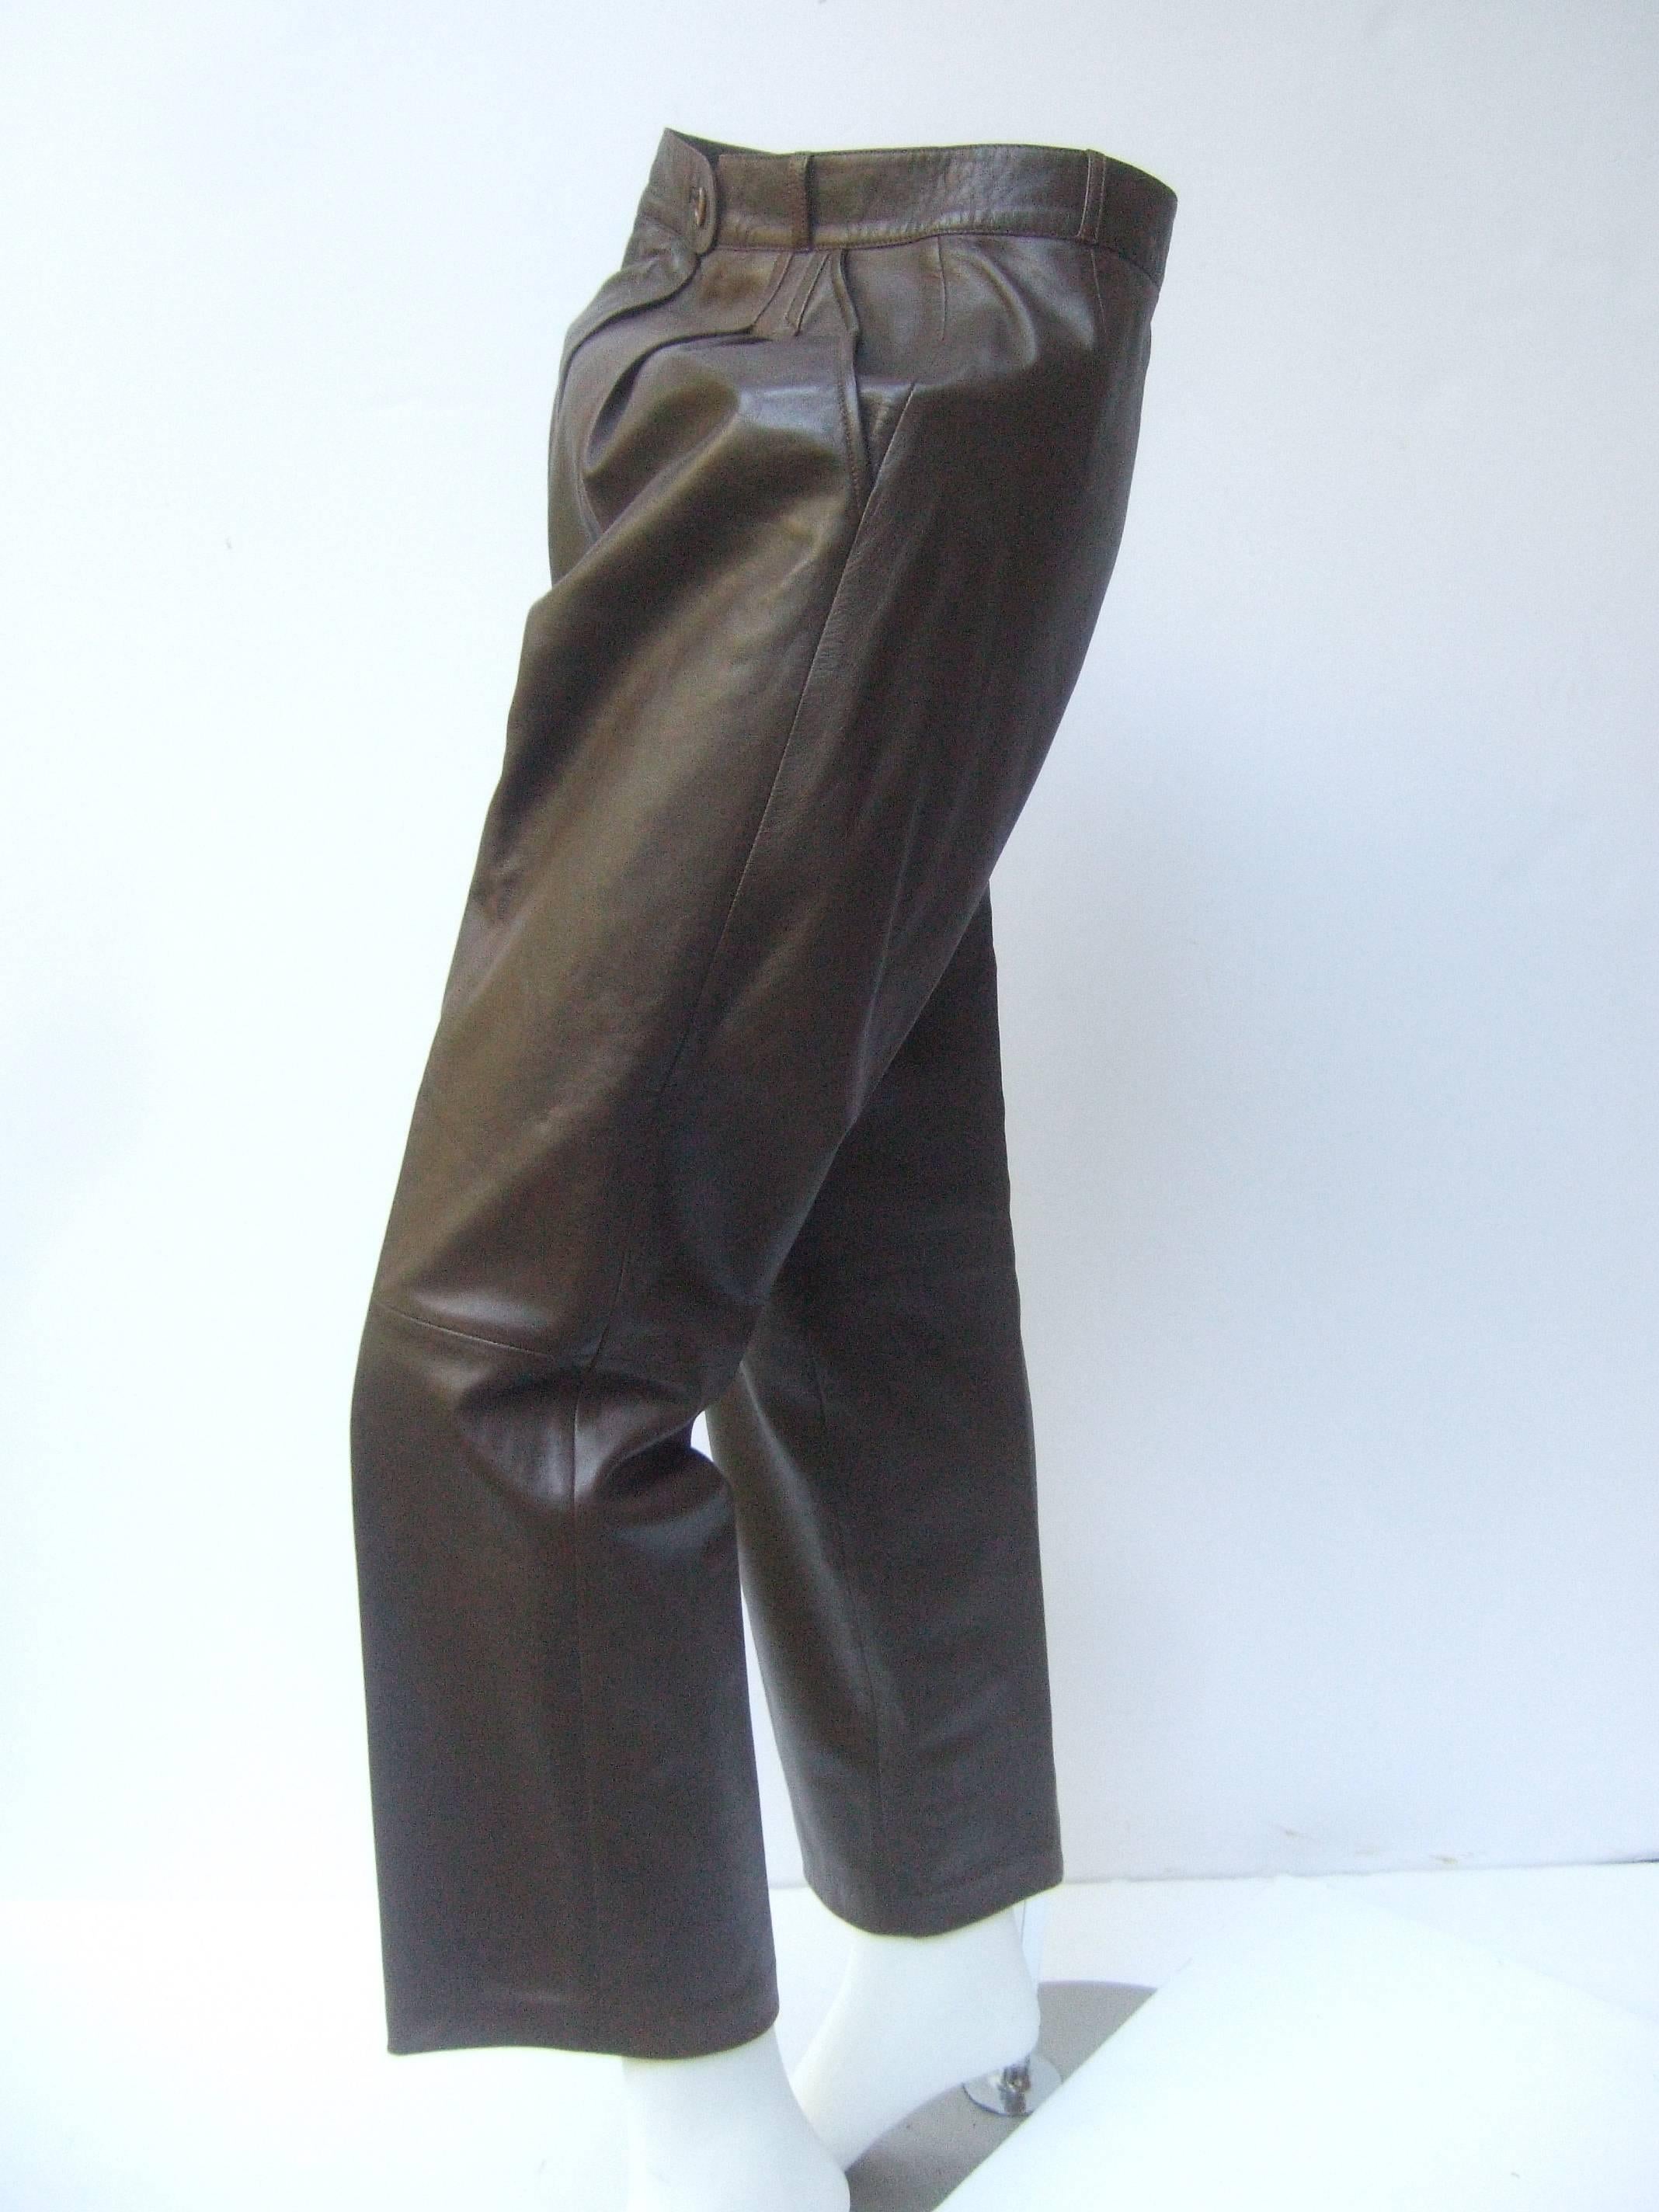 Gucci Italy Brown leather vintage slacks c 1970s
The tobacco brown leather slacks are 
buttery soft lined in brown satin acetate 
with Gucci's script signature repeated  
throughout

The high waisted supple leather slacks 
are designed with